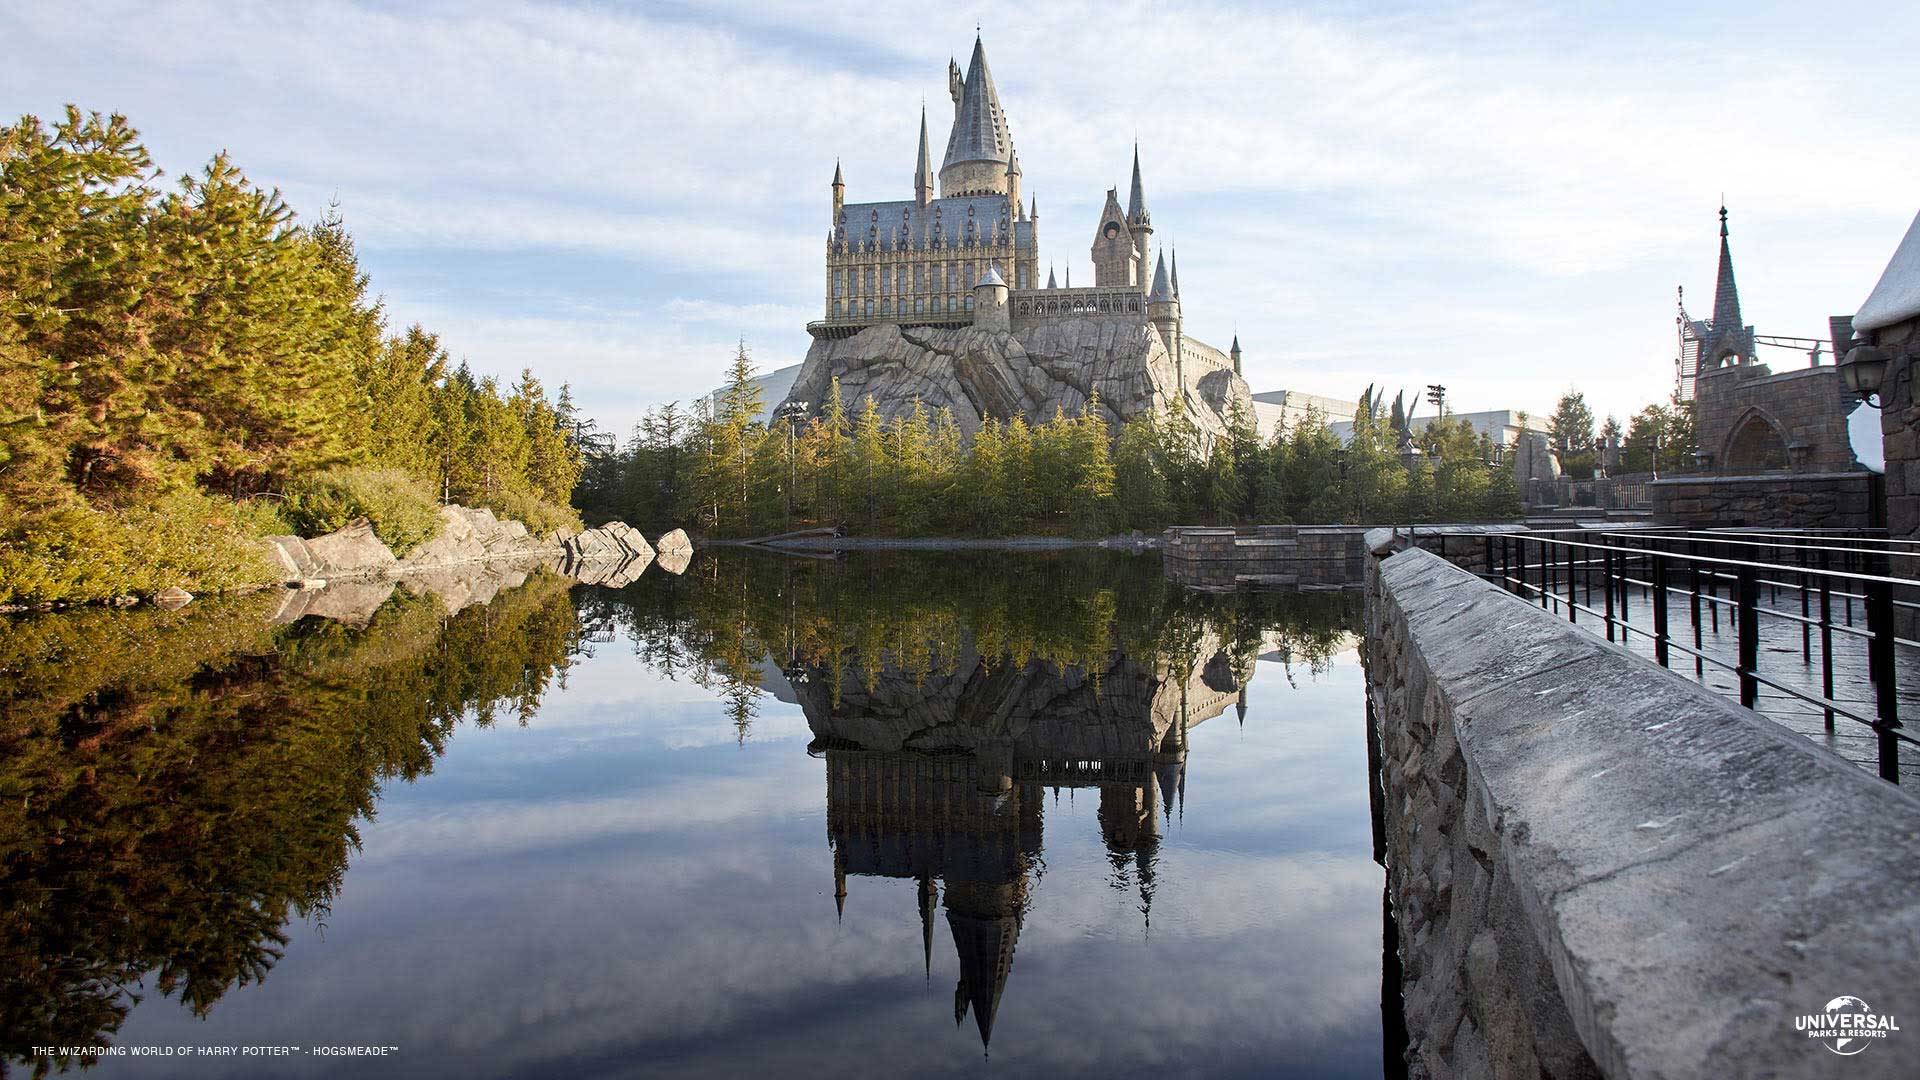 Try out our new Harry Potter themed .wizardingworld.com